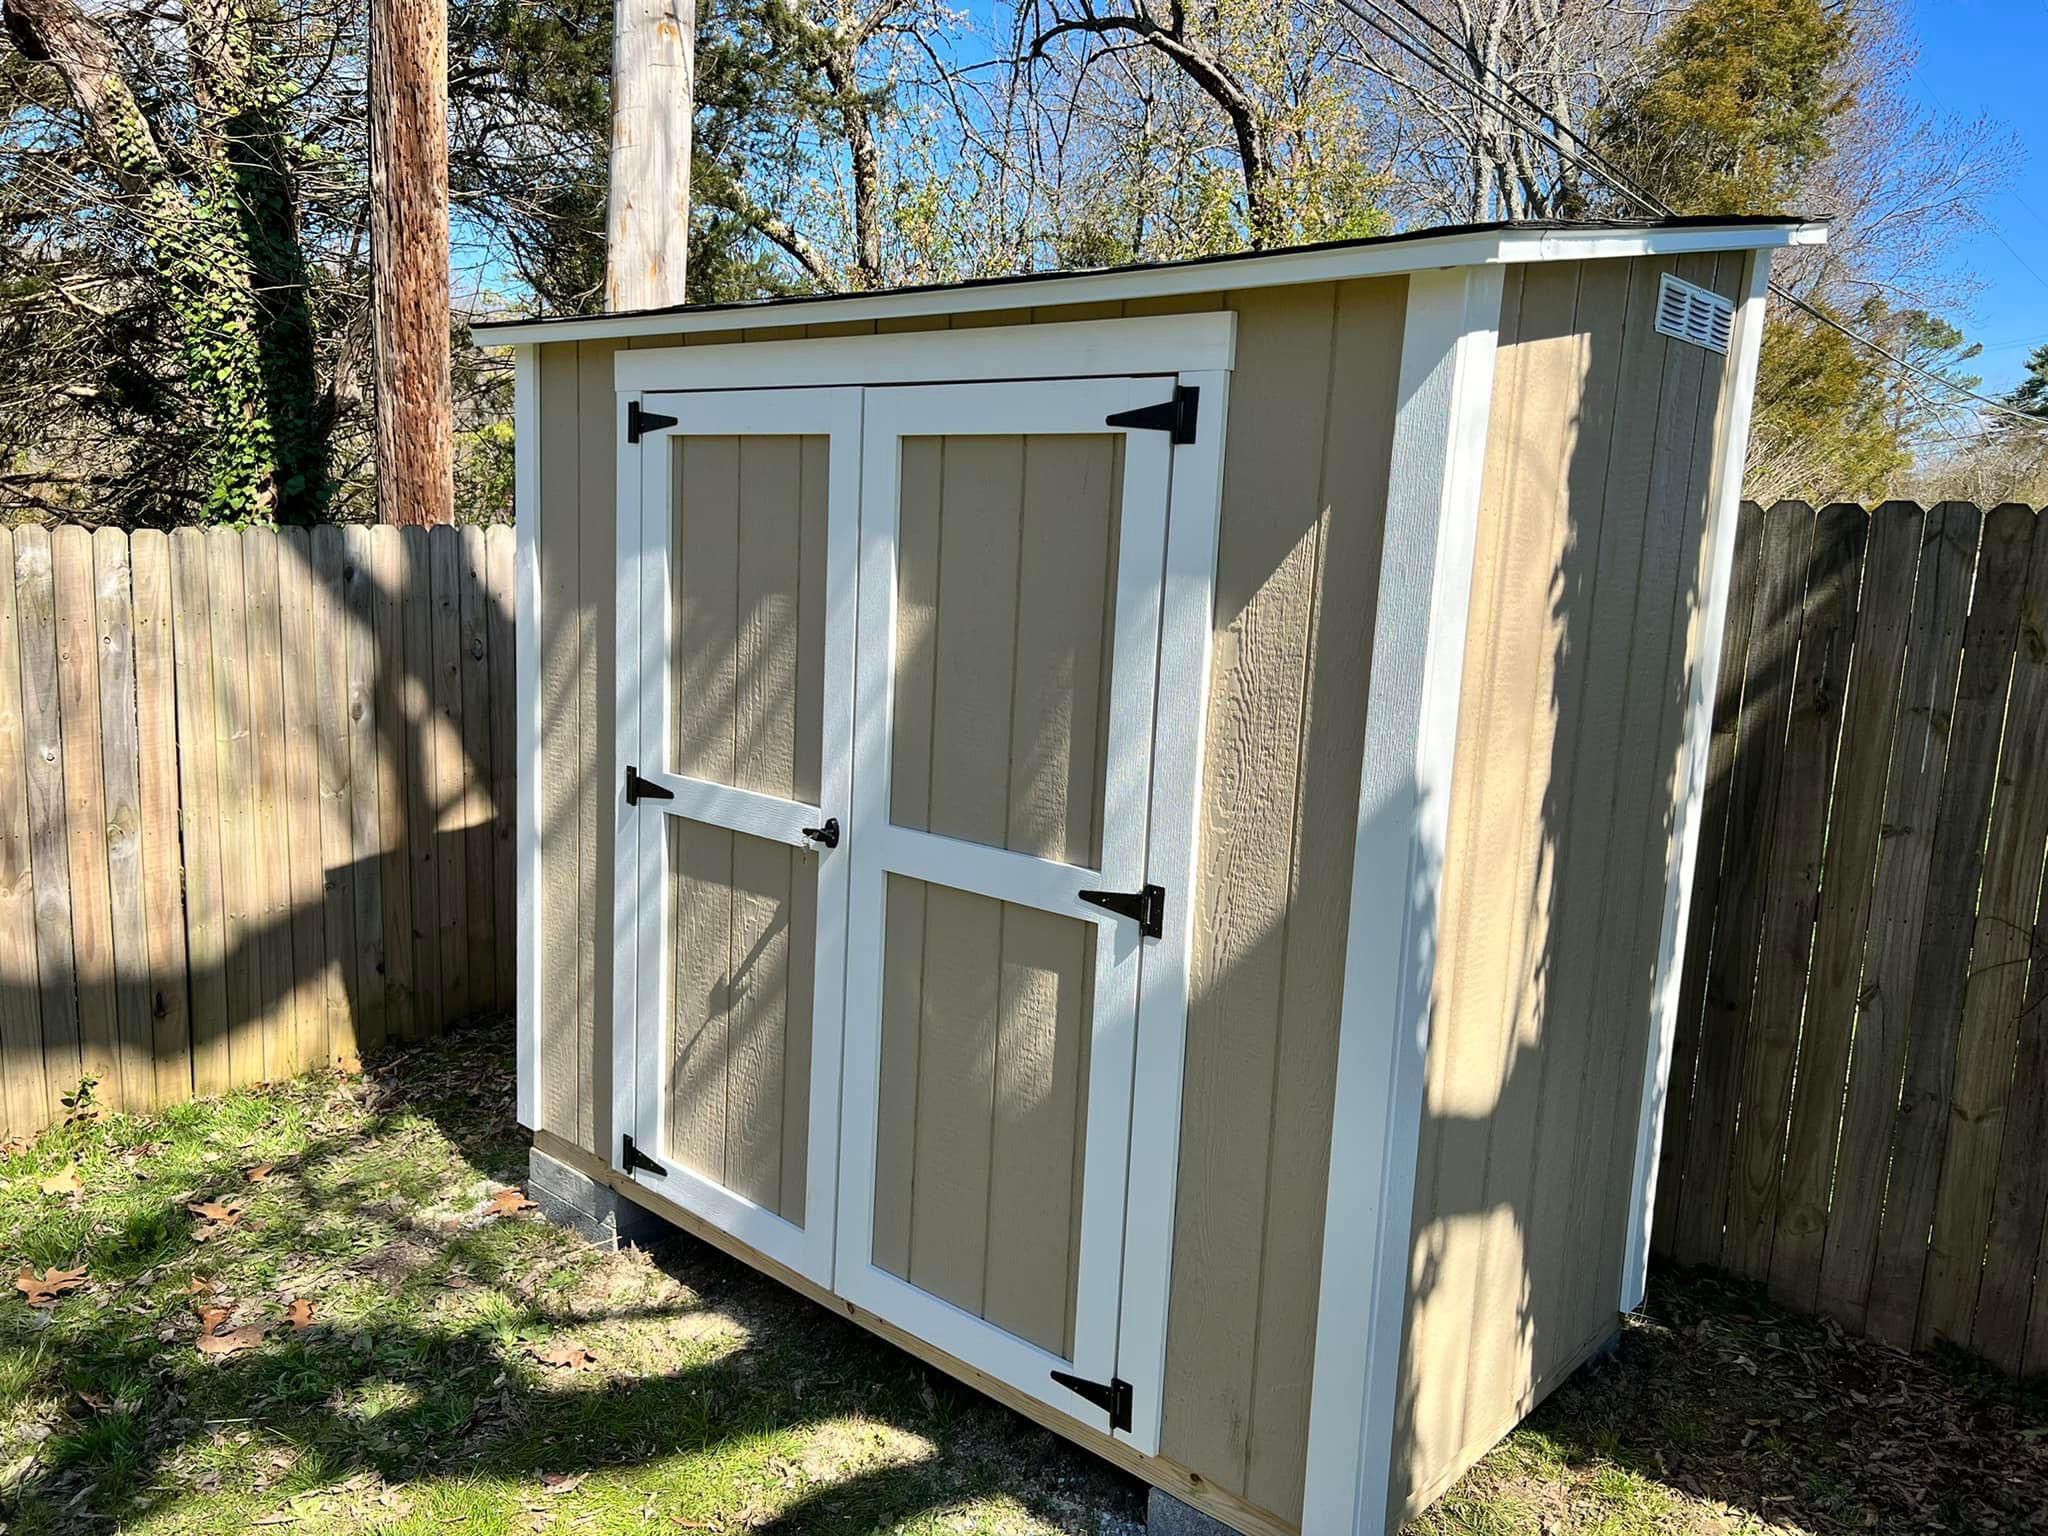 ⭐️ BUY THIS SHED ⭐️